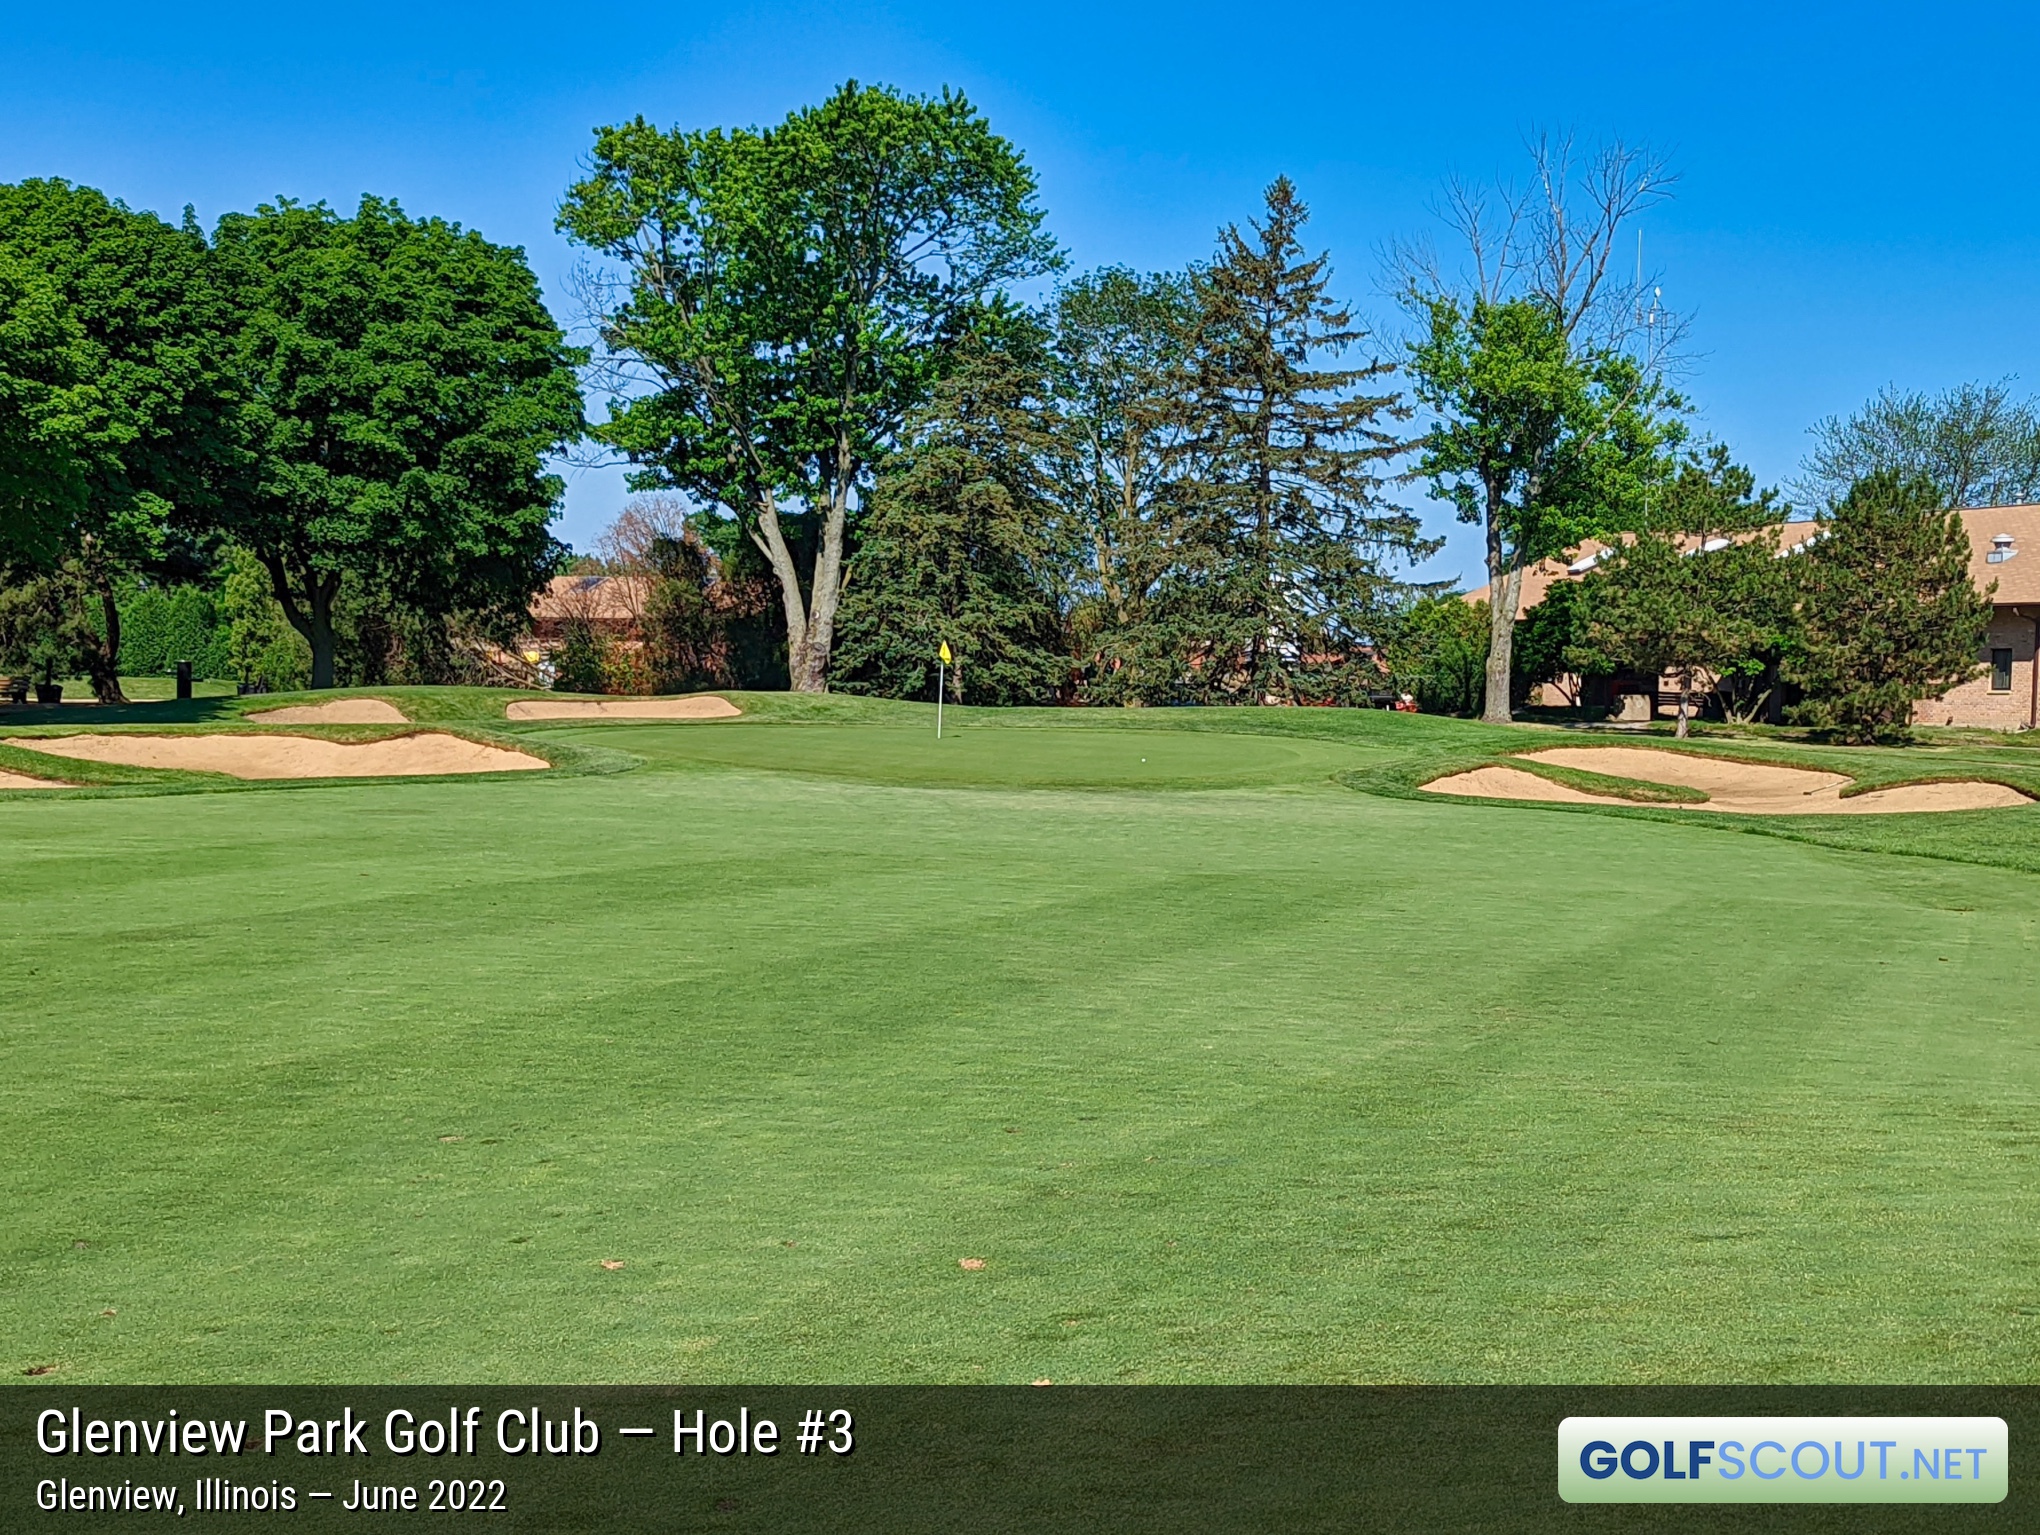 Photo of hole #3 at Glenview Park Golf Club in Glenview, Illinois. 